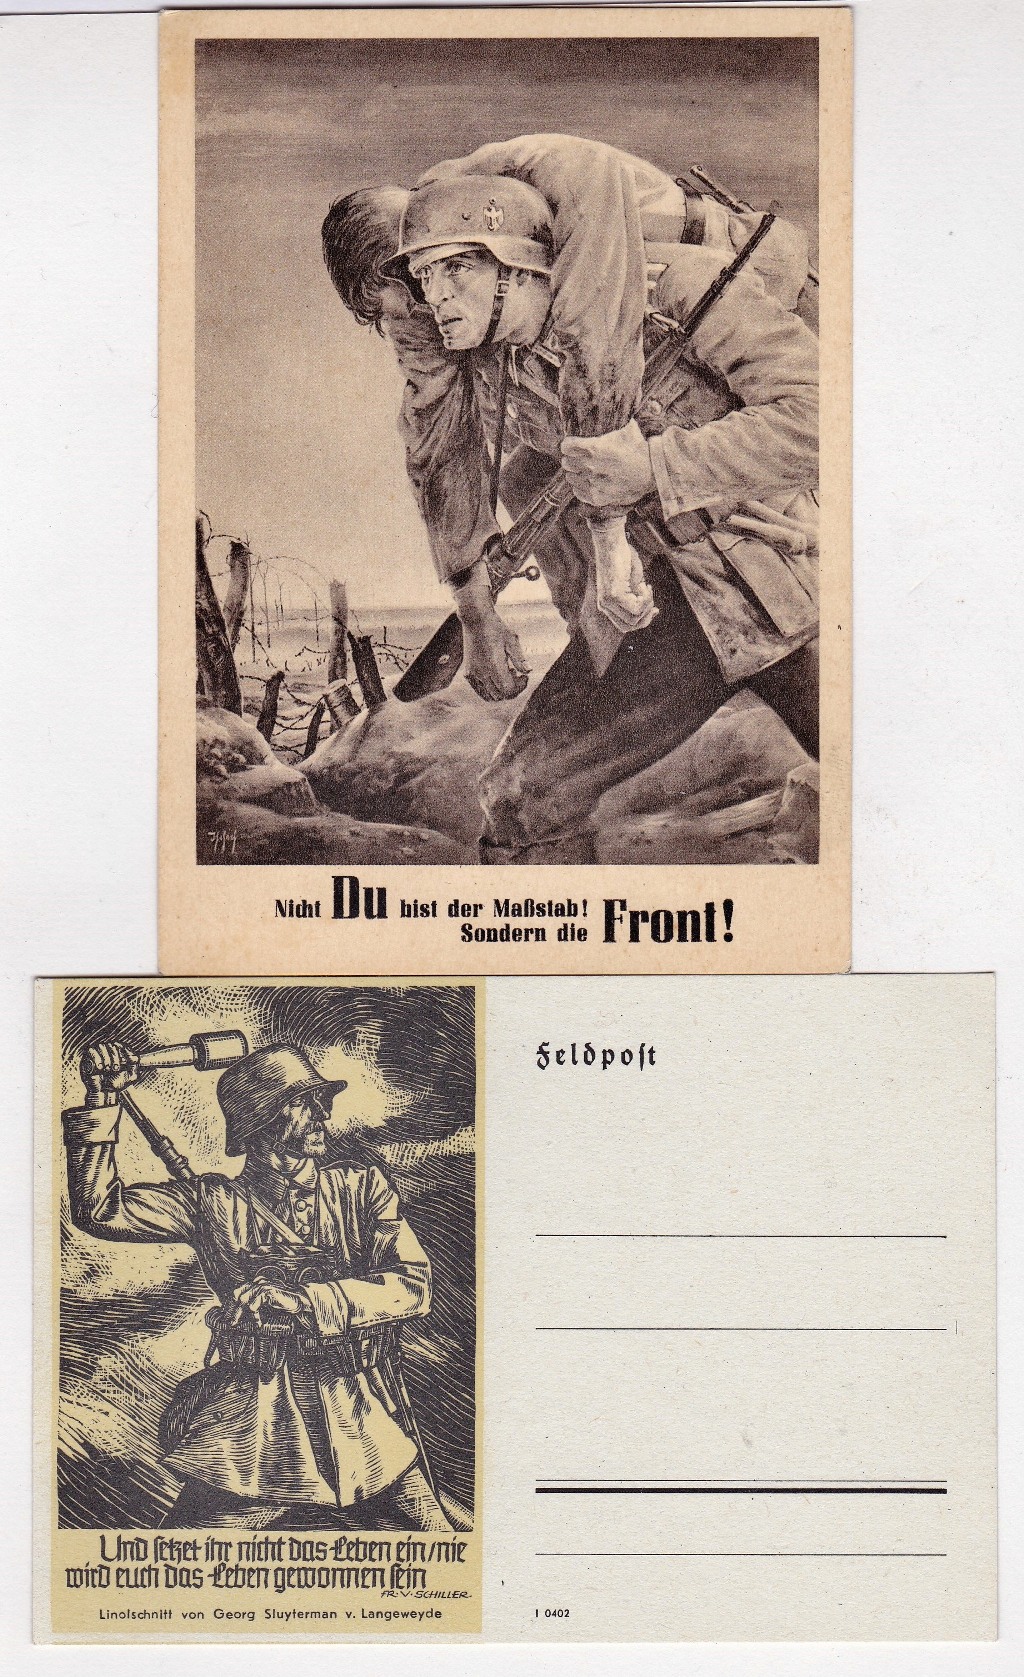 Pack of German propaganda postcards (1) issued for Nazi Party Day Polish General Government 1943-